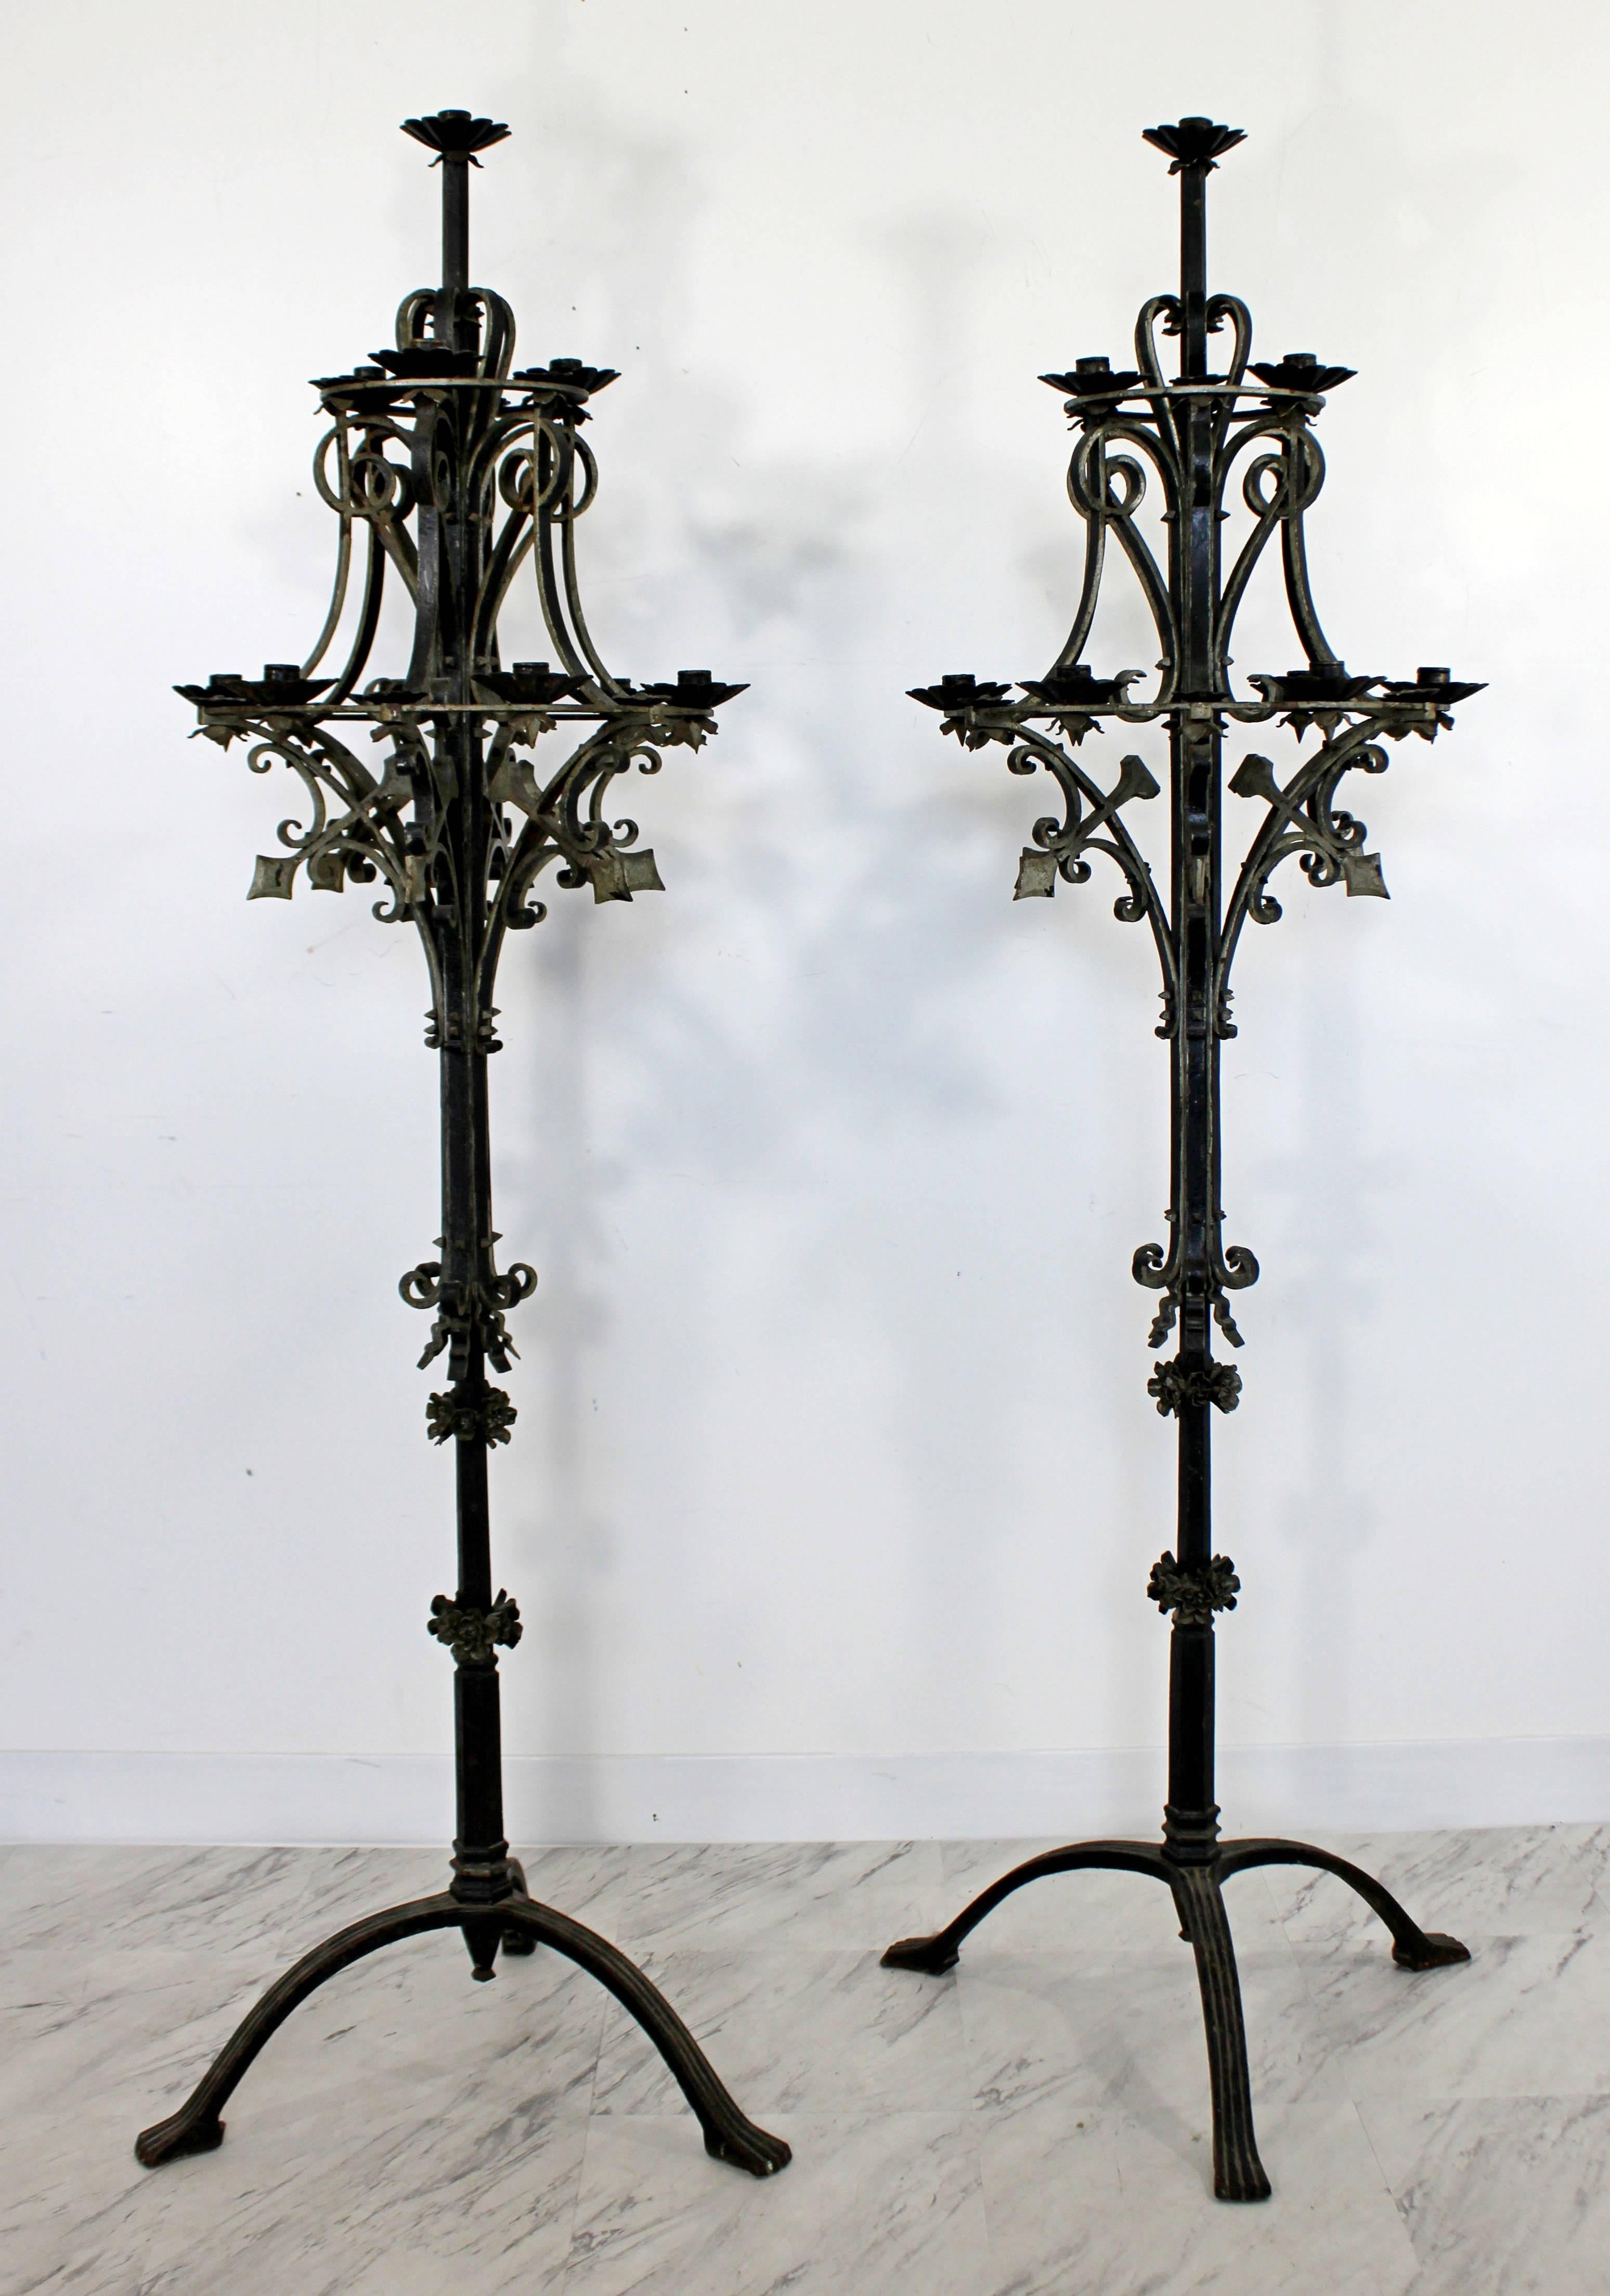 For your consideration is a thick and majestic pair of iron metal, standing candelabra, with floral designs. In great condition. The dimensions are 18